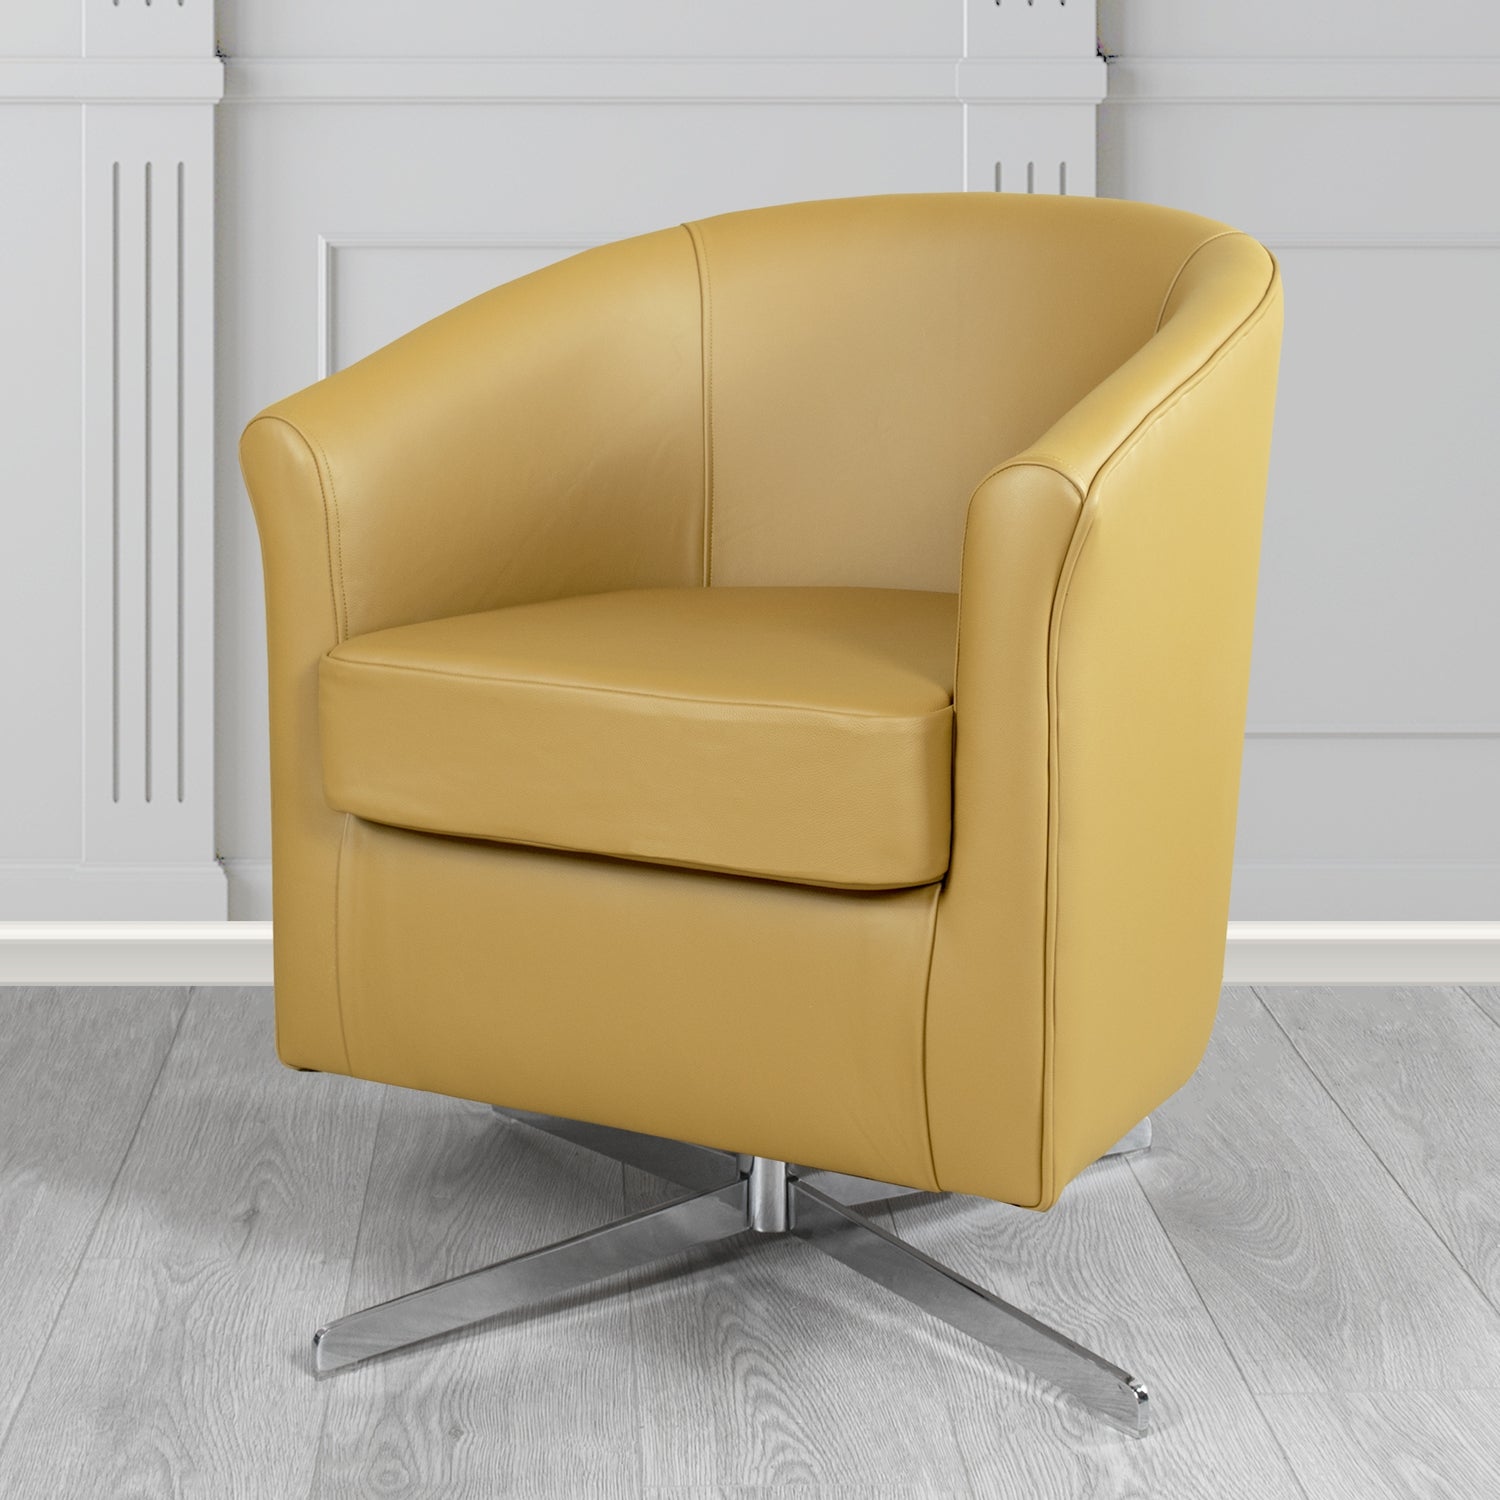 Cannes Swivel Tub Chair in Shelly Parchment Crib 5 Genuine Leather - The Tub Chair Shop